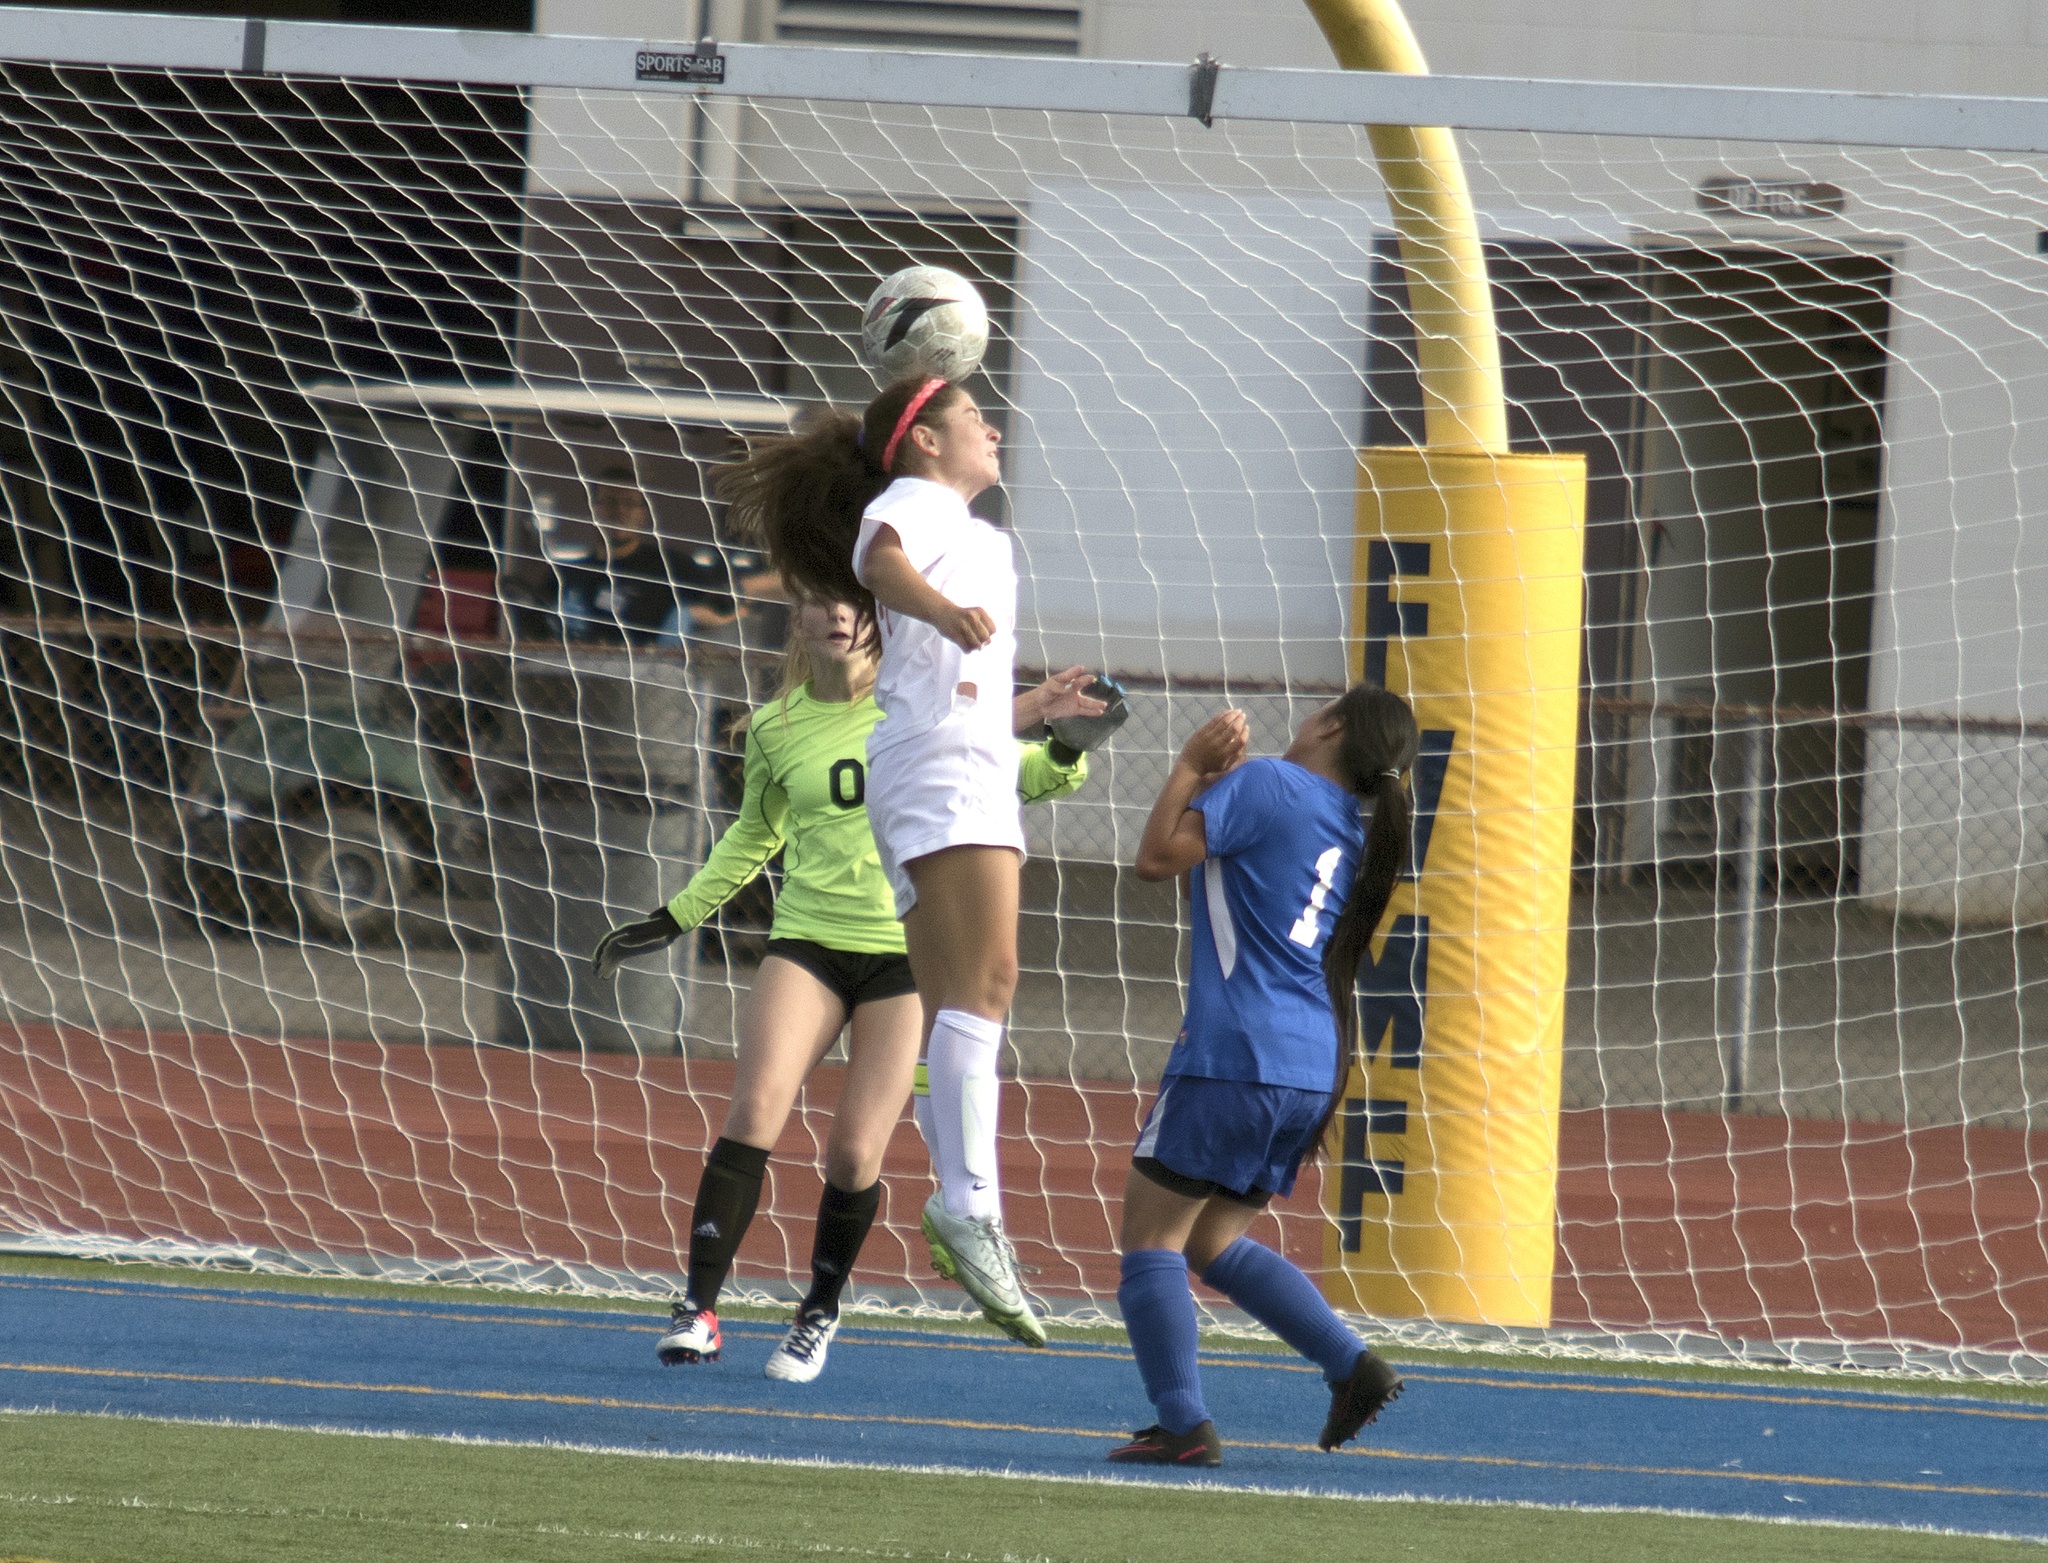 Hailey Still became the school's all-time leading scorer in just her first game with Thomas Jefferson soccer. Photo by Richard Blaster